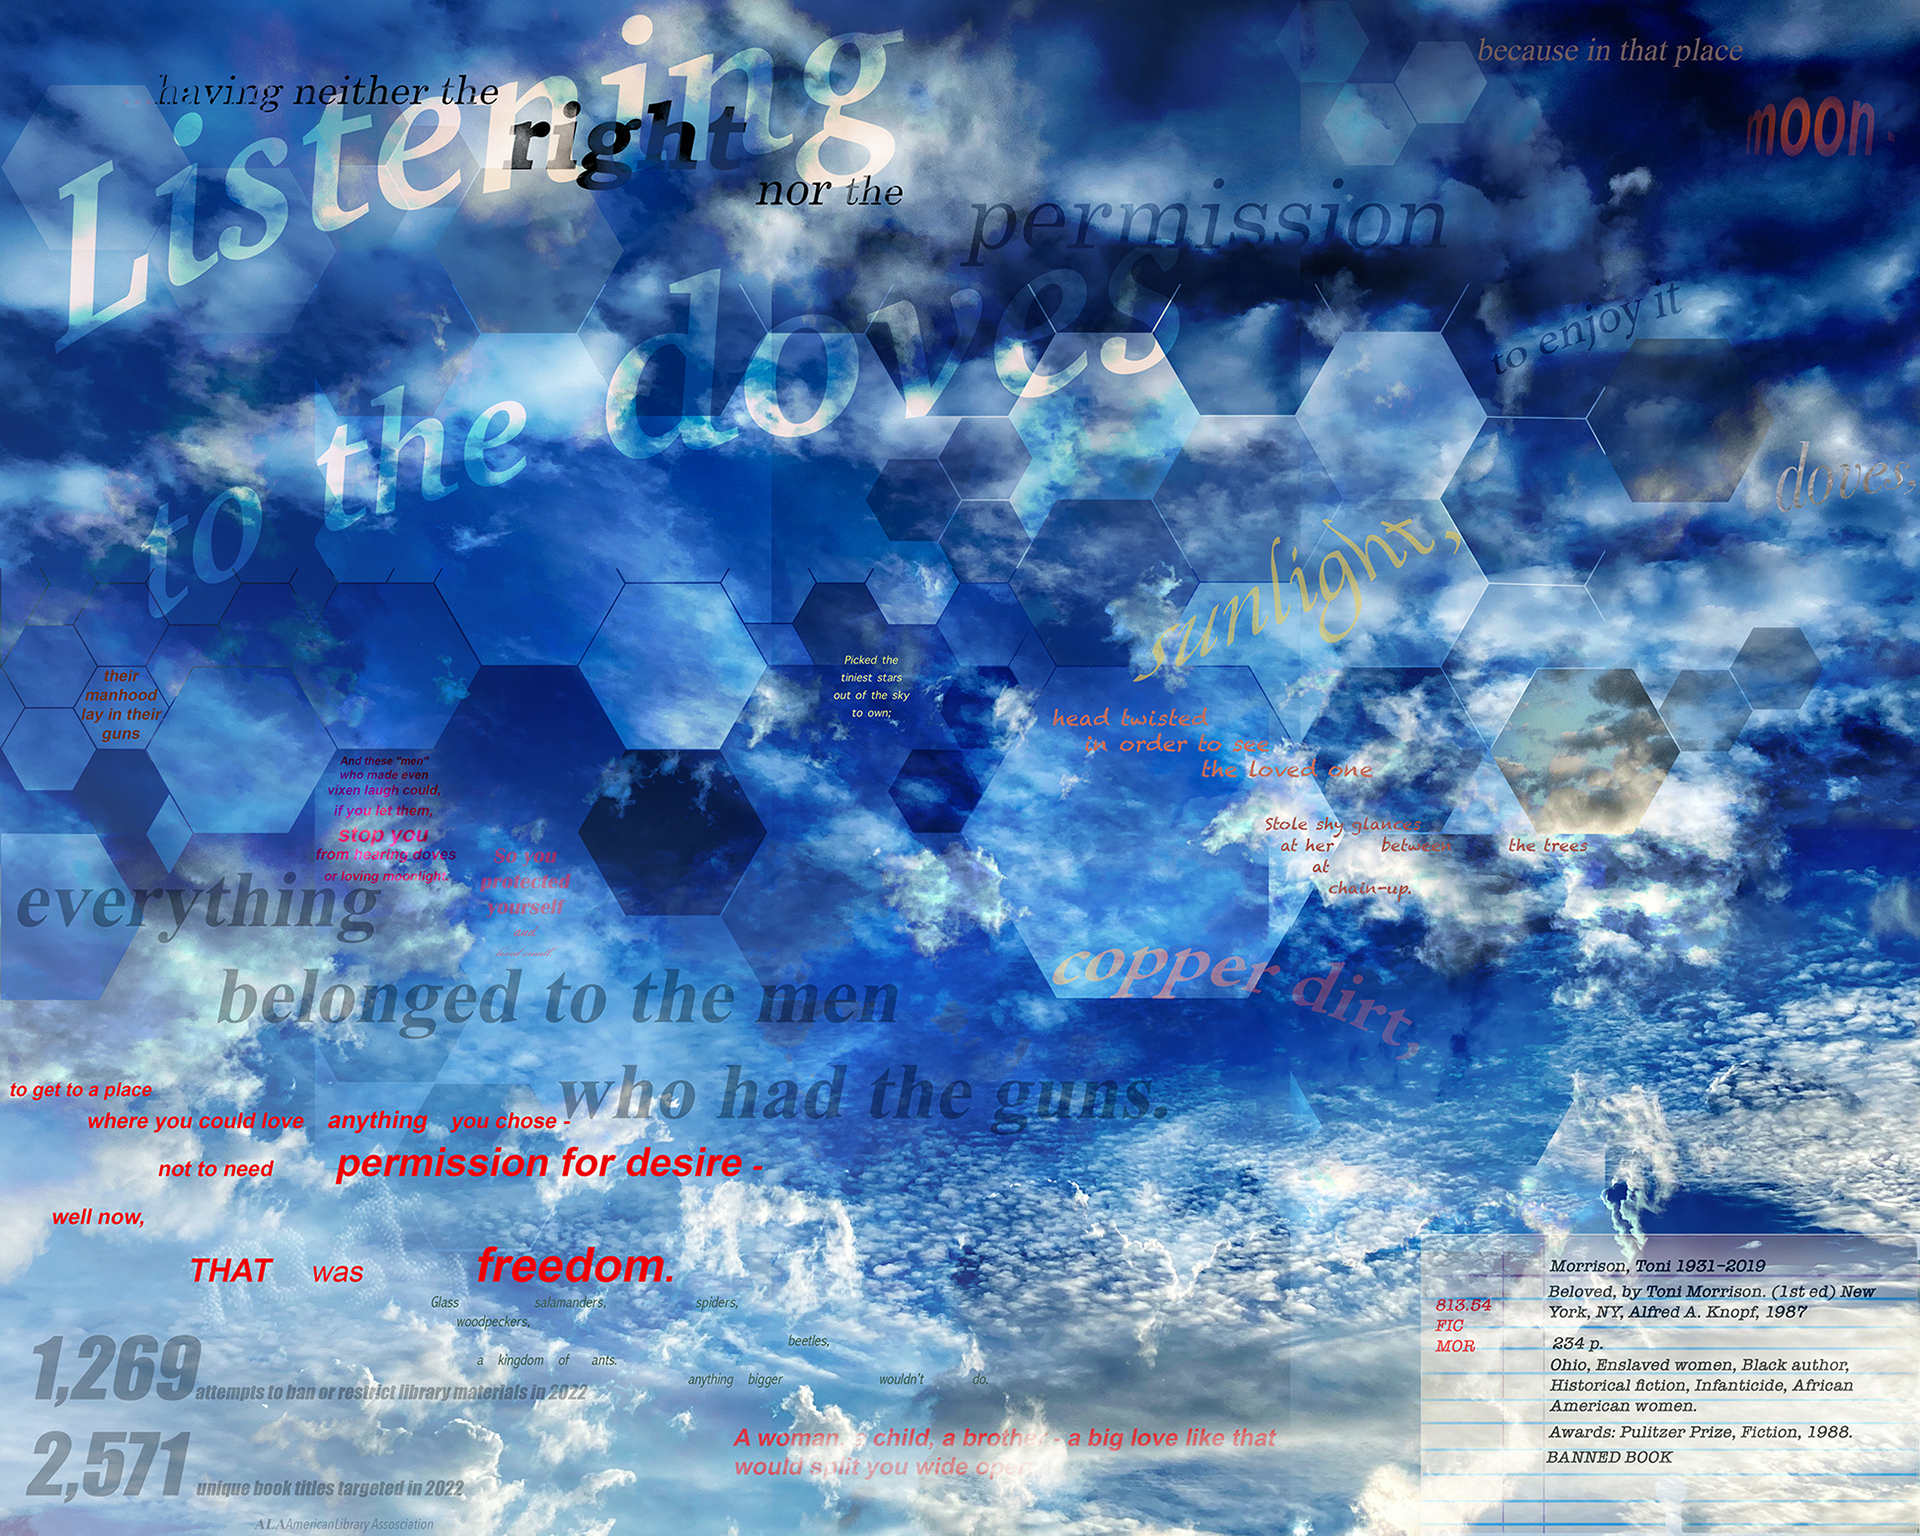 BANNED! Beloved, Toni Morrison; pigmented ink jet print; 20” x 16”; 2023 A sky is composed of hexagons, numbers, and text from Toni Morrison's novel, Beloved.